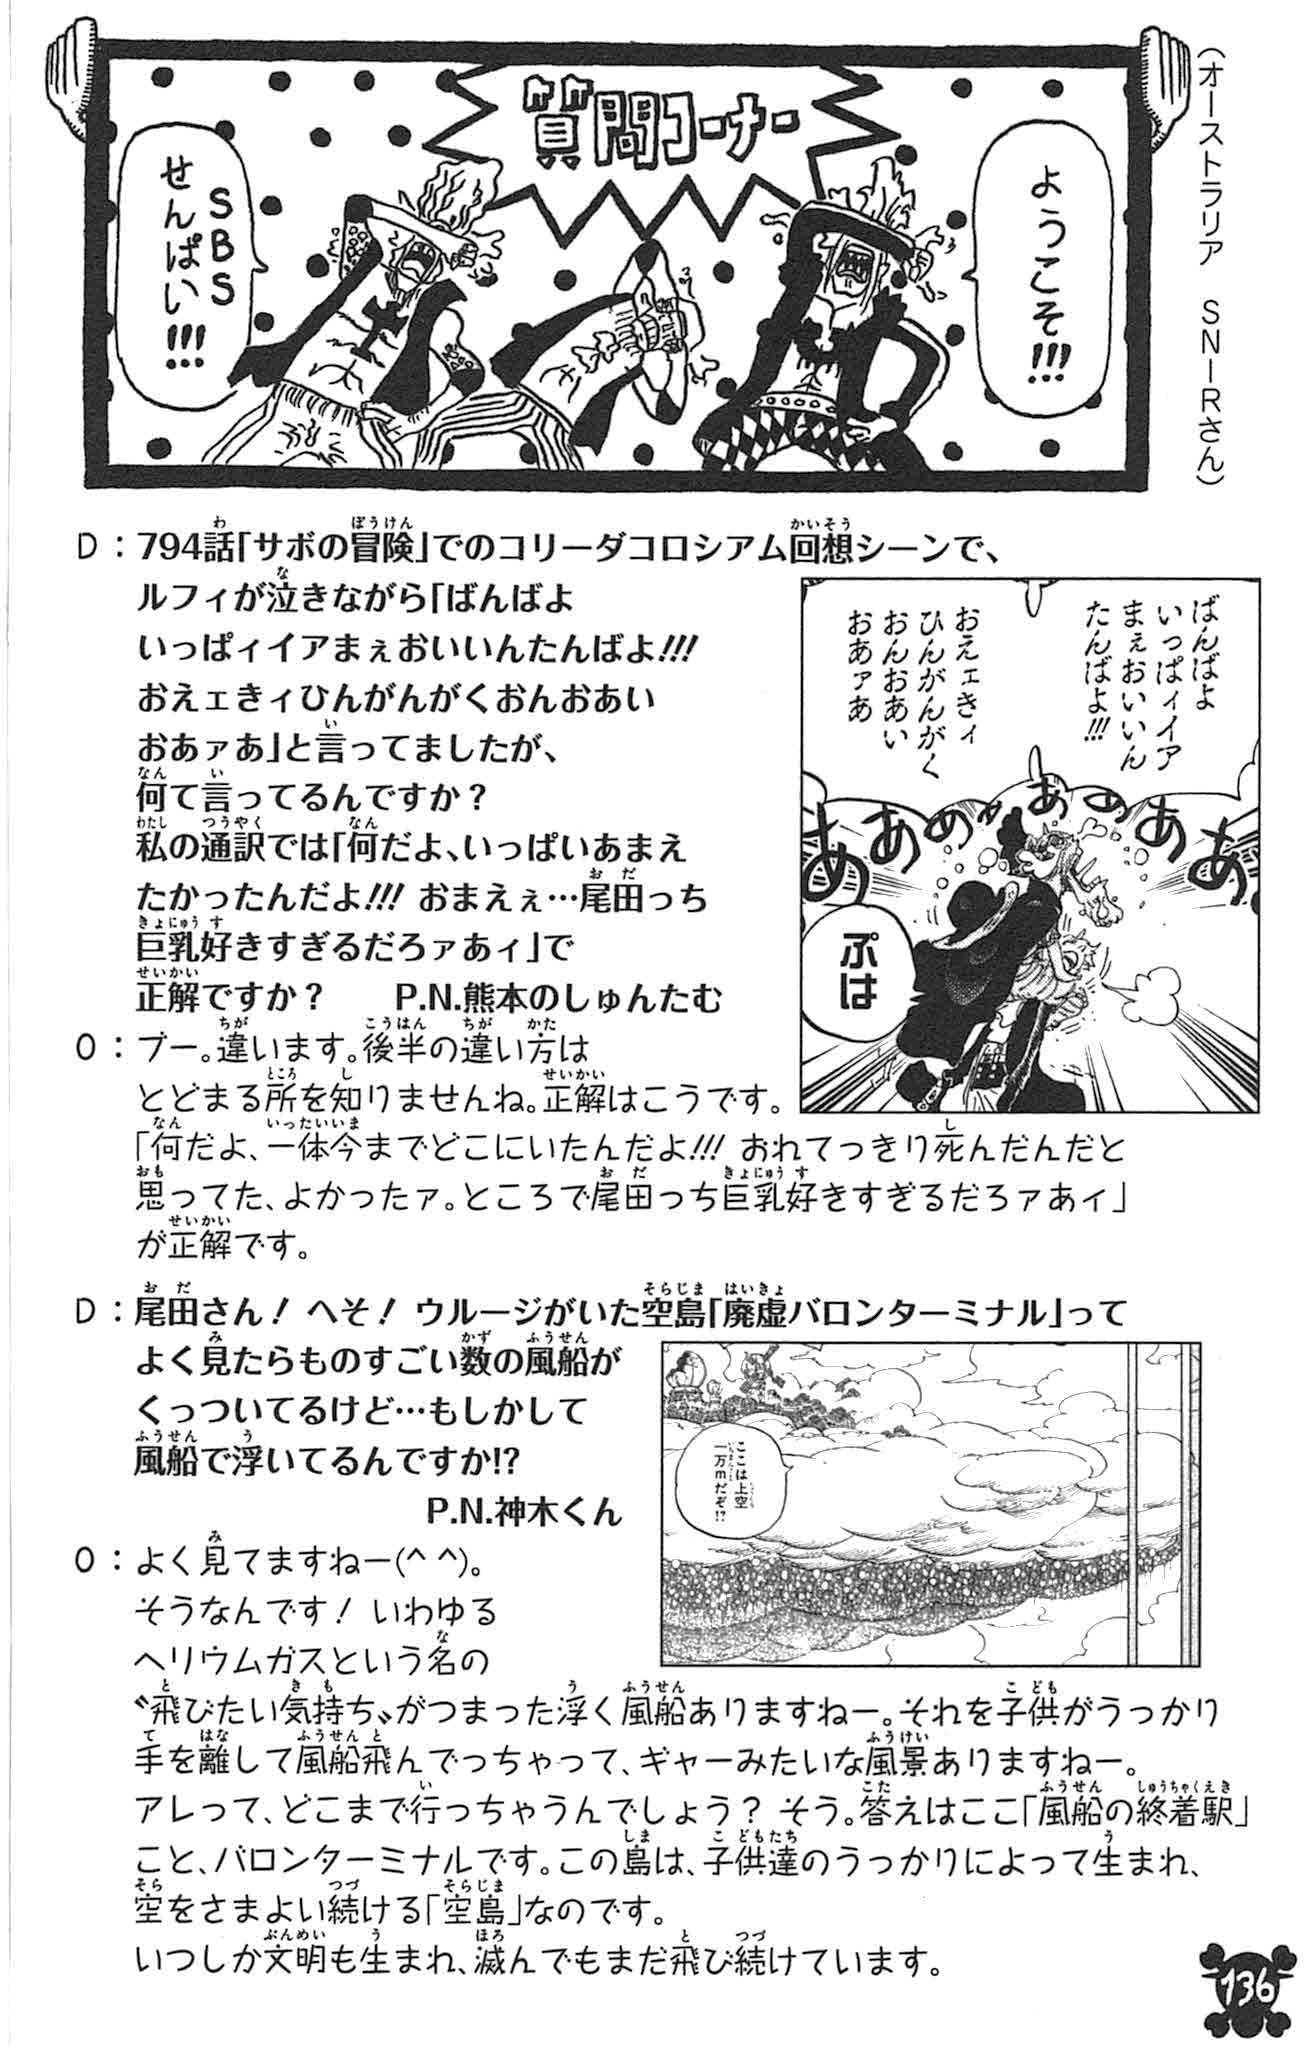 Snir Aharon My Drawing Featured In Volume 80 Of The Manga One Piece